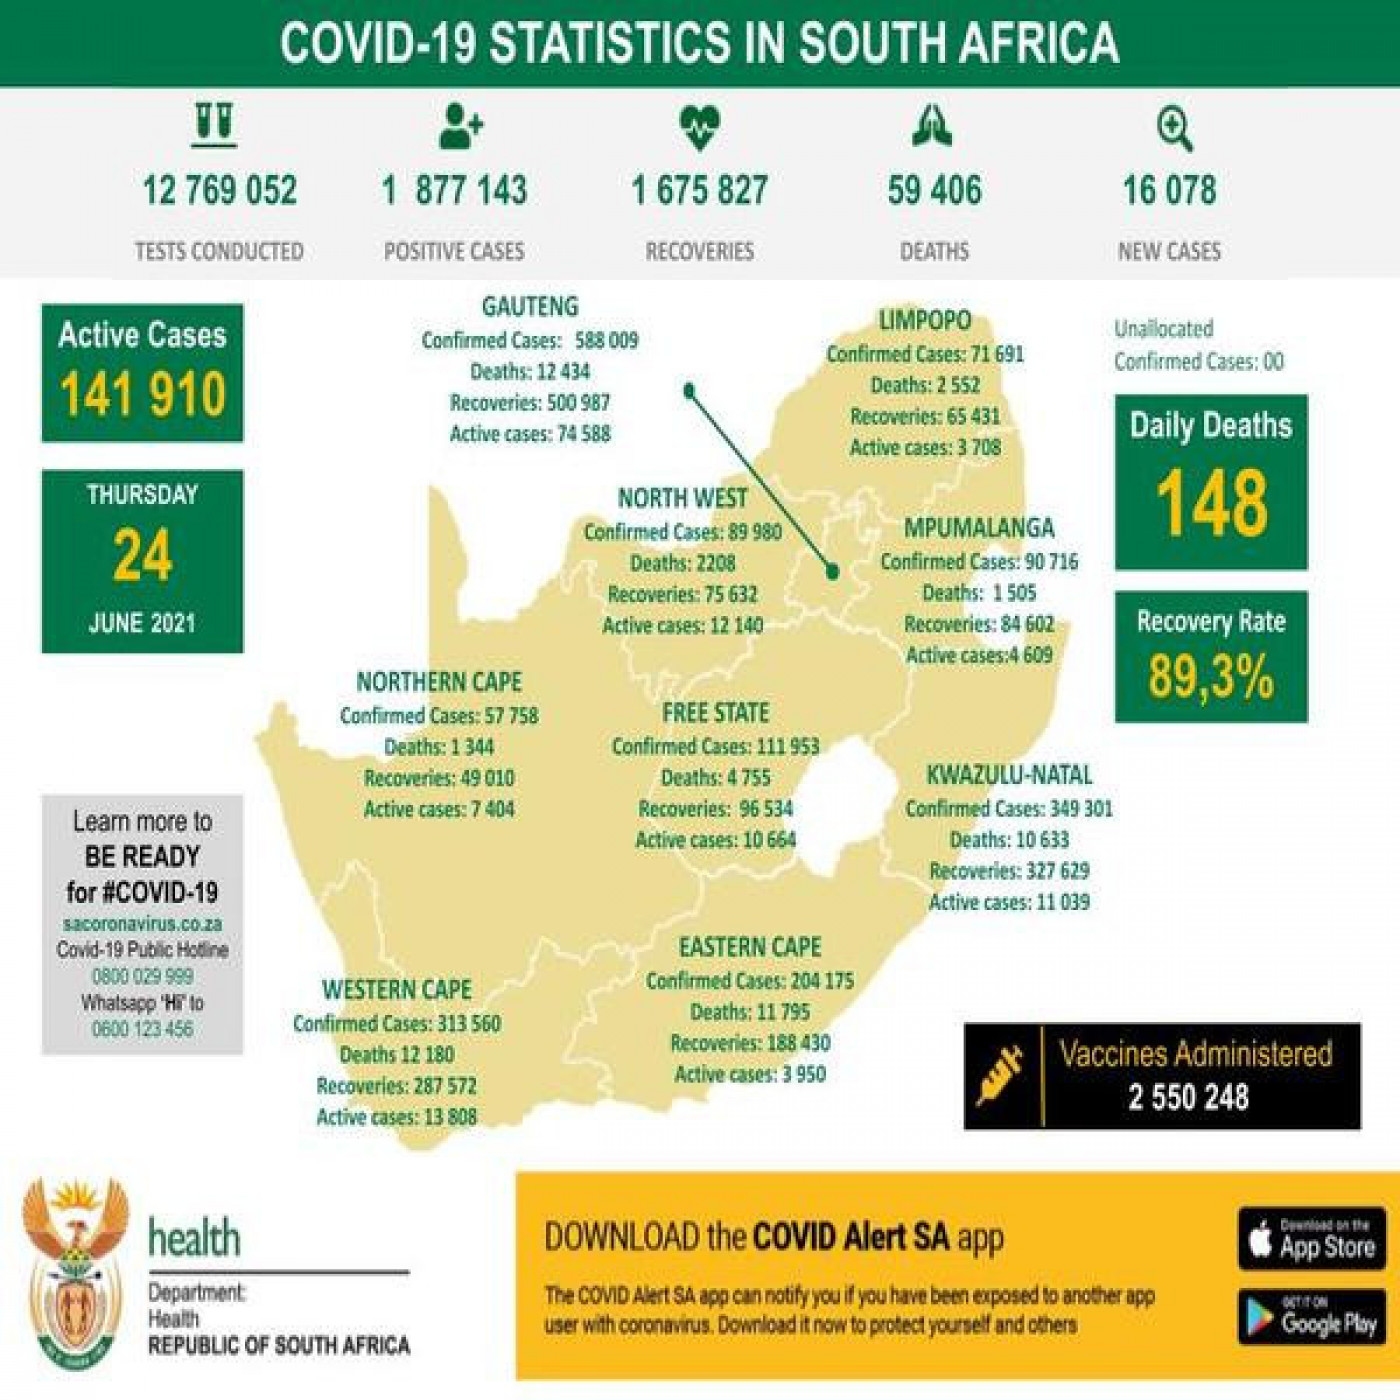 Update on Covid-19 in South Africa